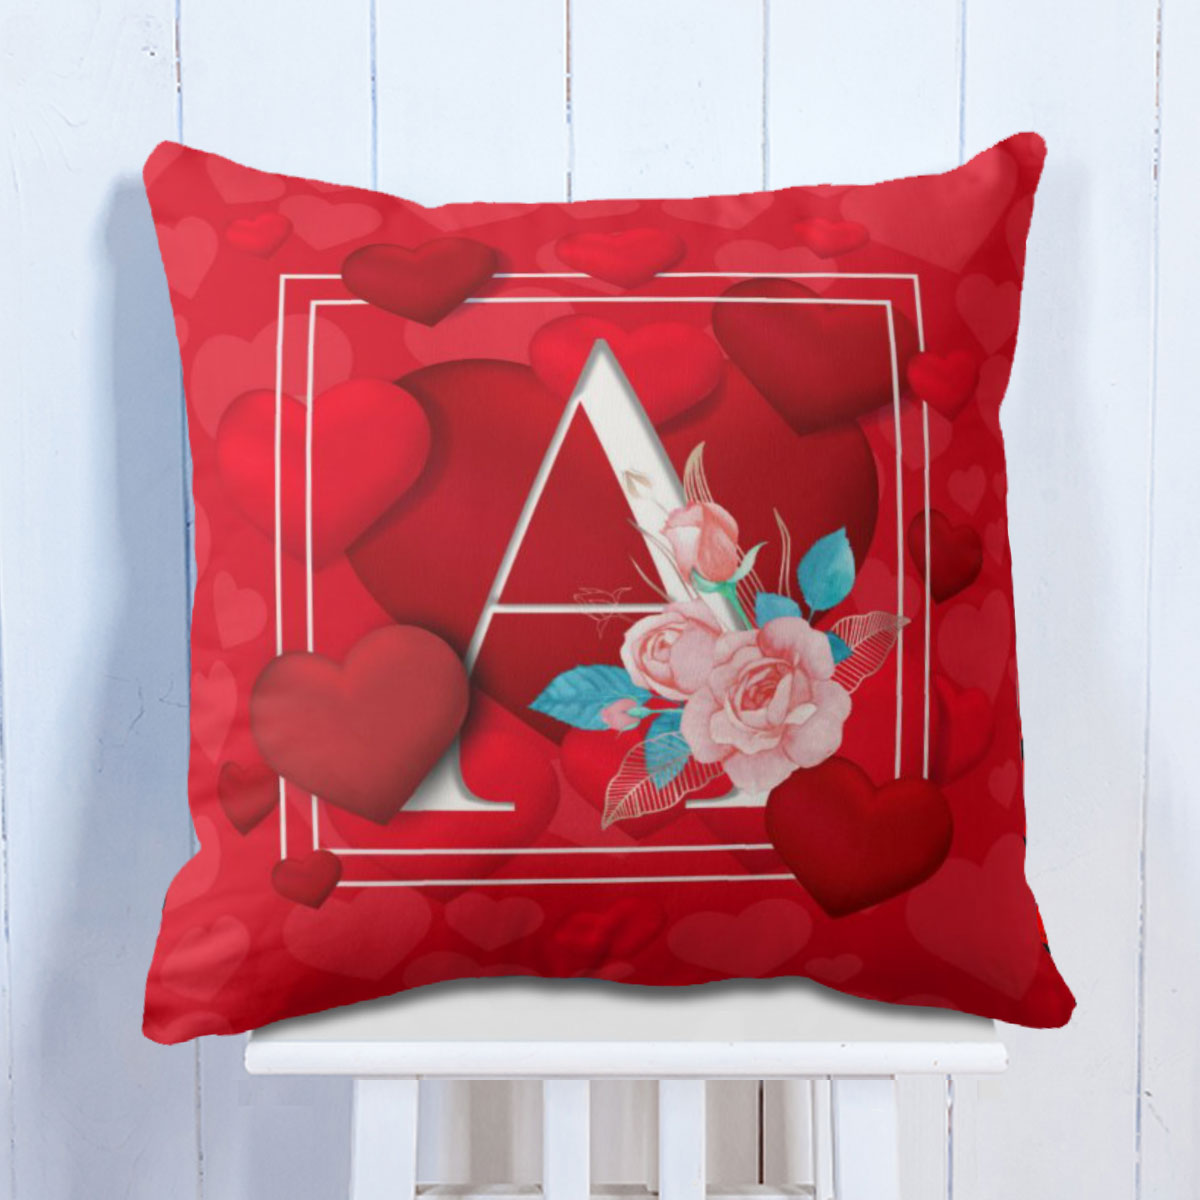 Personalised Love Initial Cushion - Red